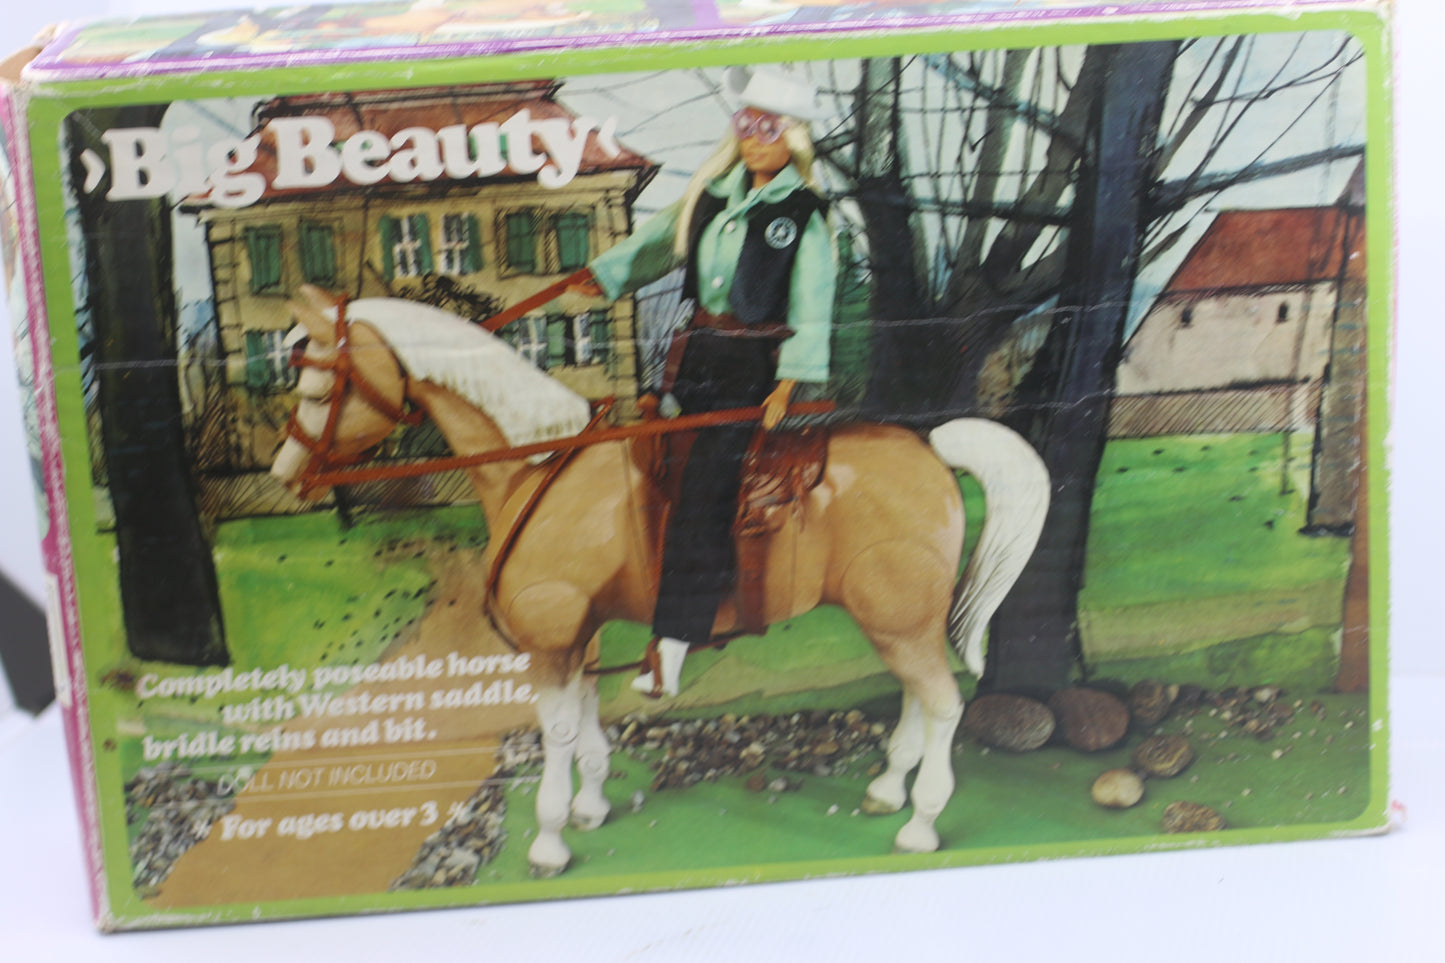 Rare Vintage 1970's Big Beauty Horse by Sears Original Box for doll barbie